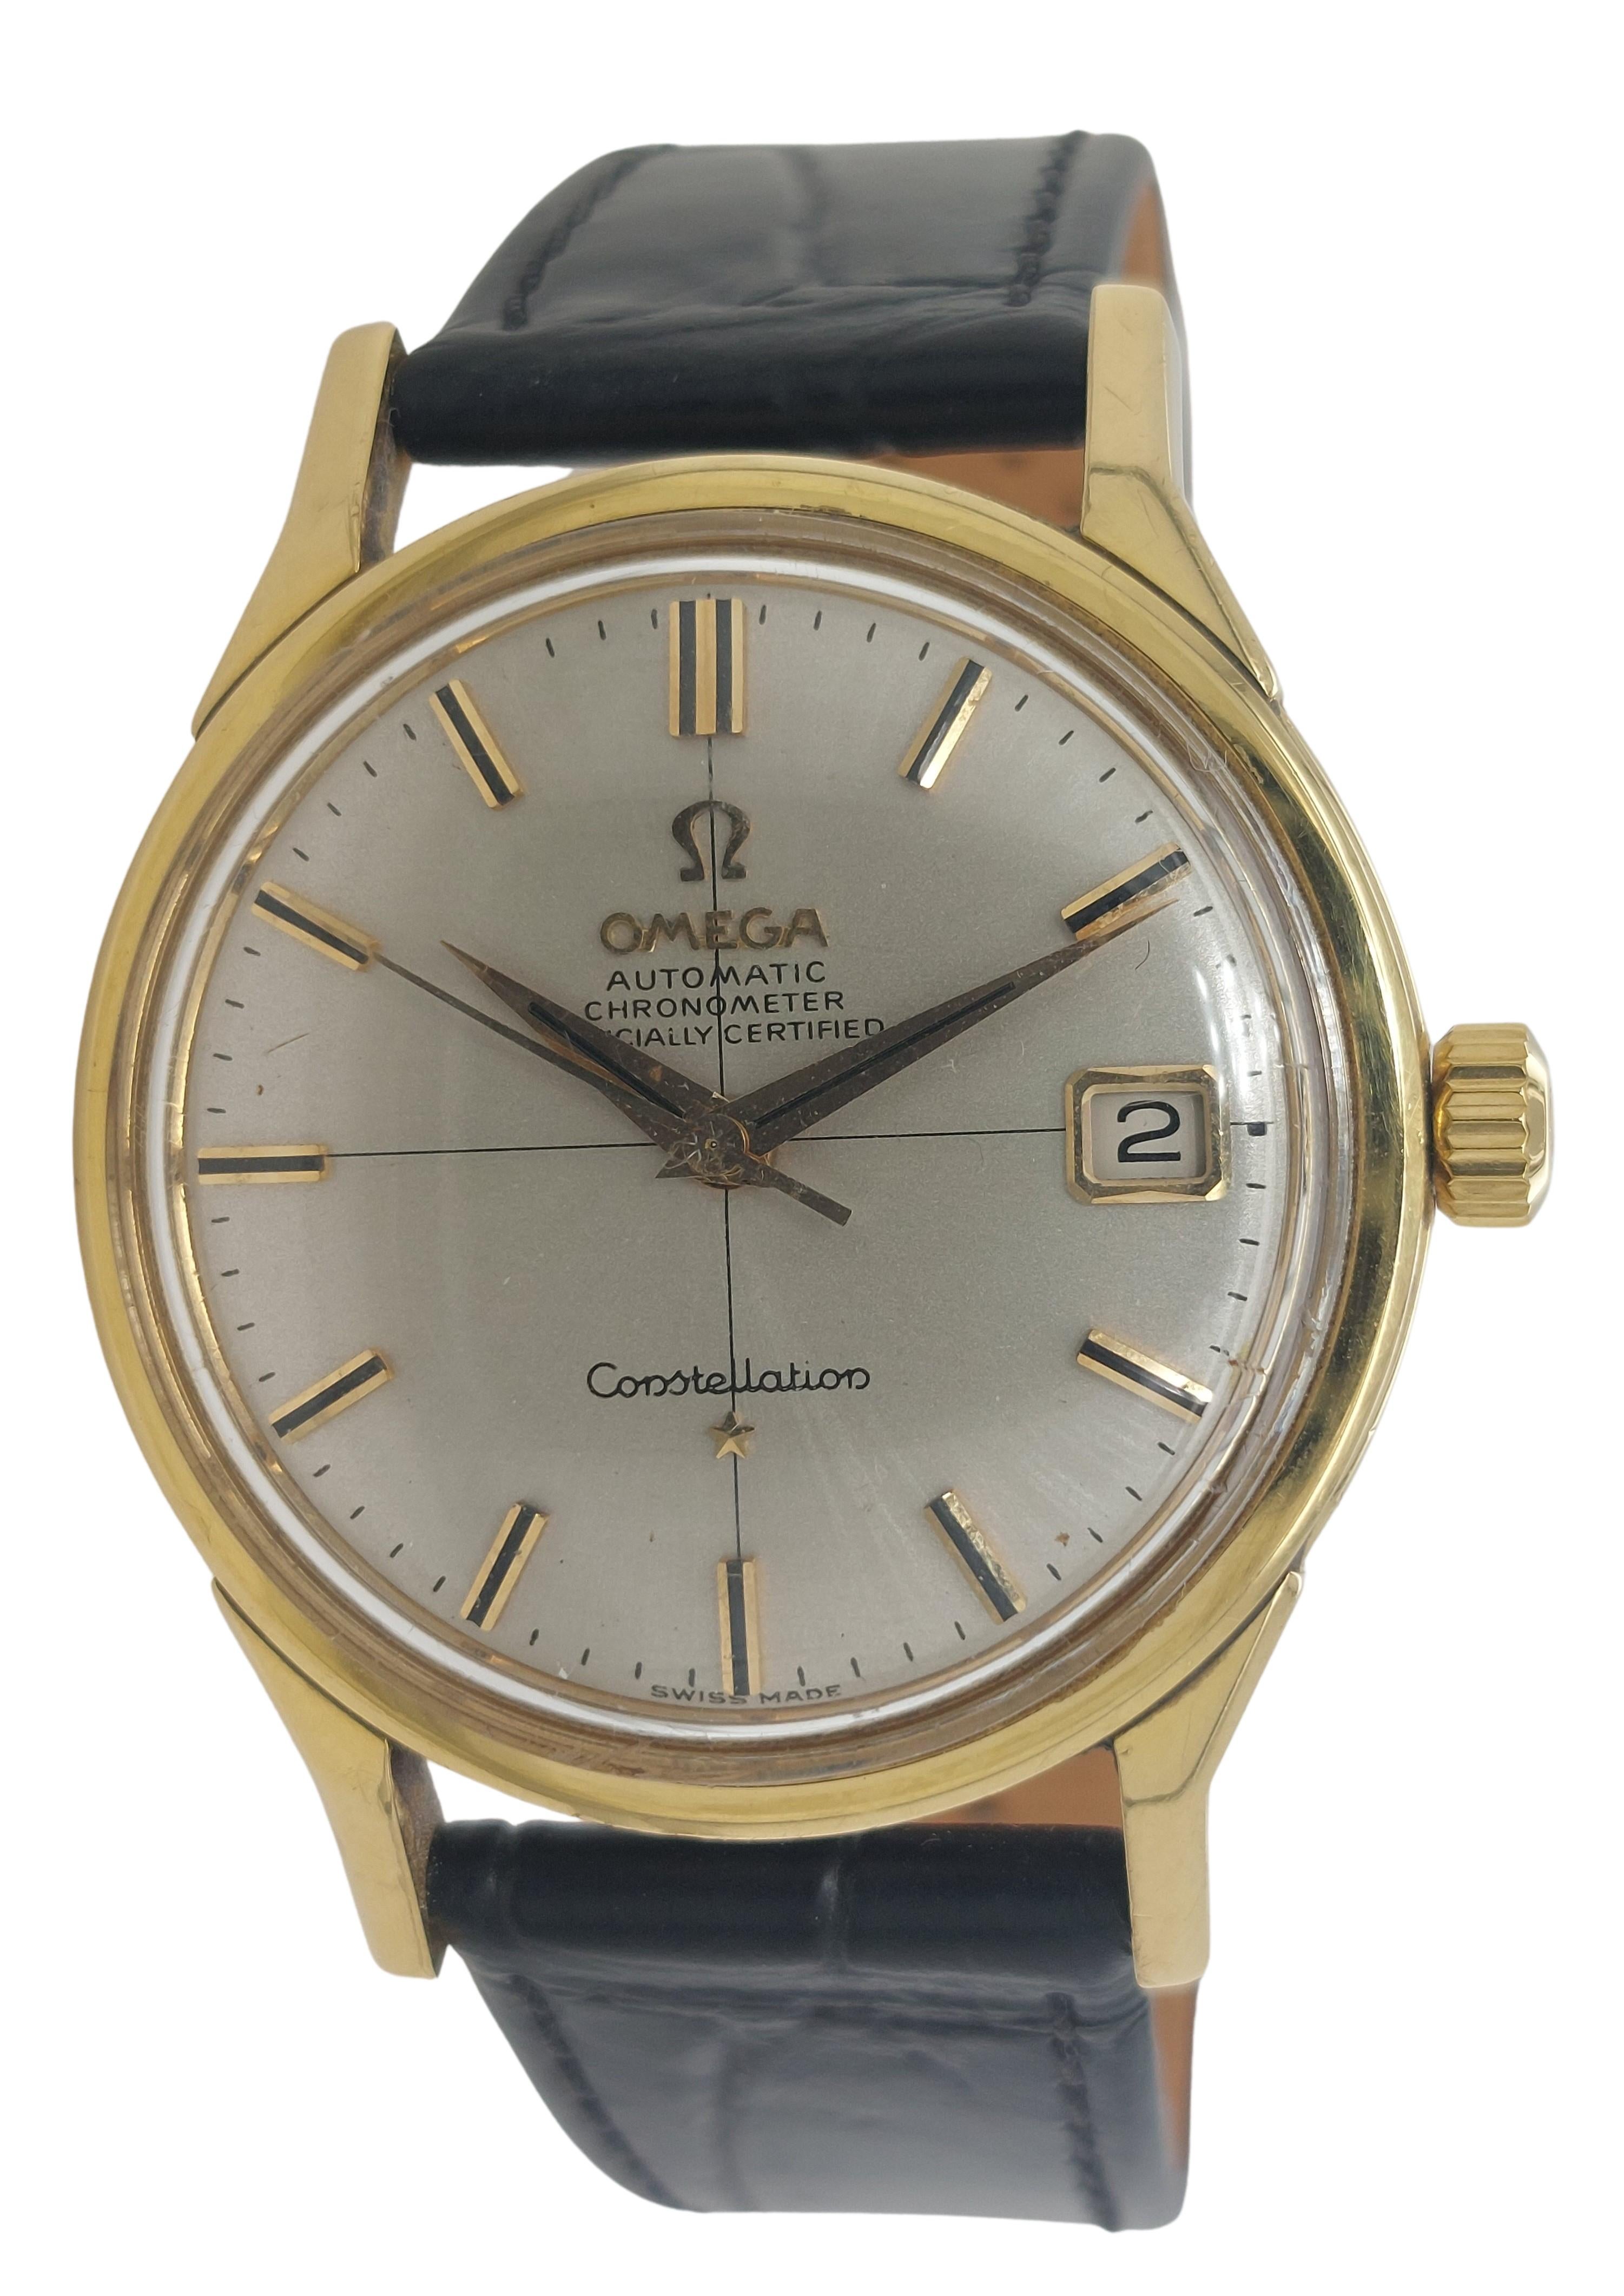 Omega Constellation Chronometer Officially Certified, 18kt solid gold case, Calibre 561 , Reference 168005

Movement: mechanical movement, automatic self winding, Calibre 561

Functions: Hours, minutes, seconds, Date

Calibre: 561, Automatic, 24